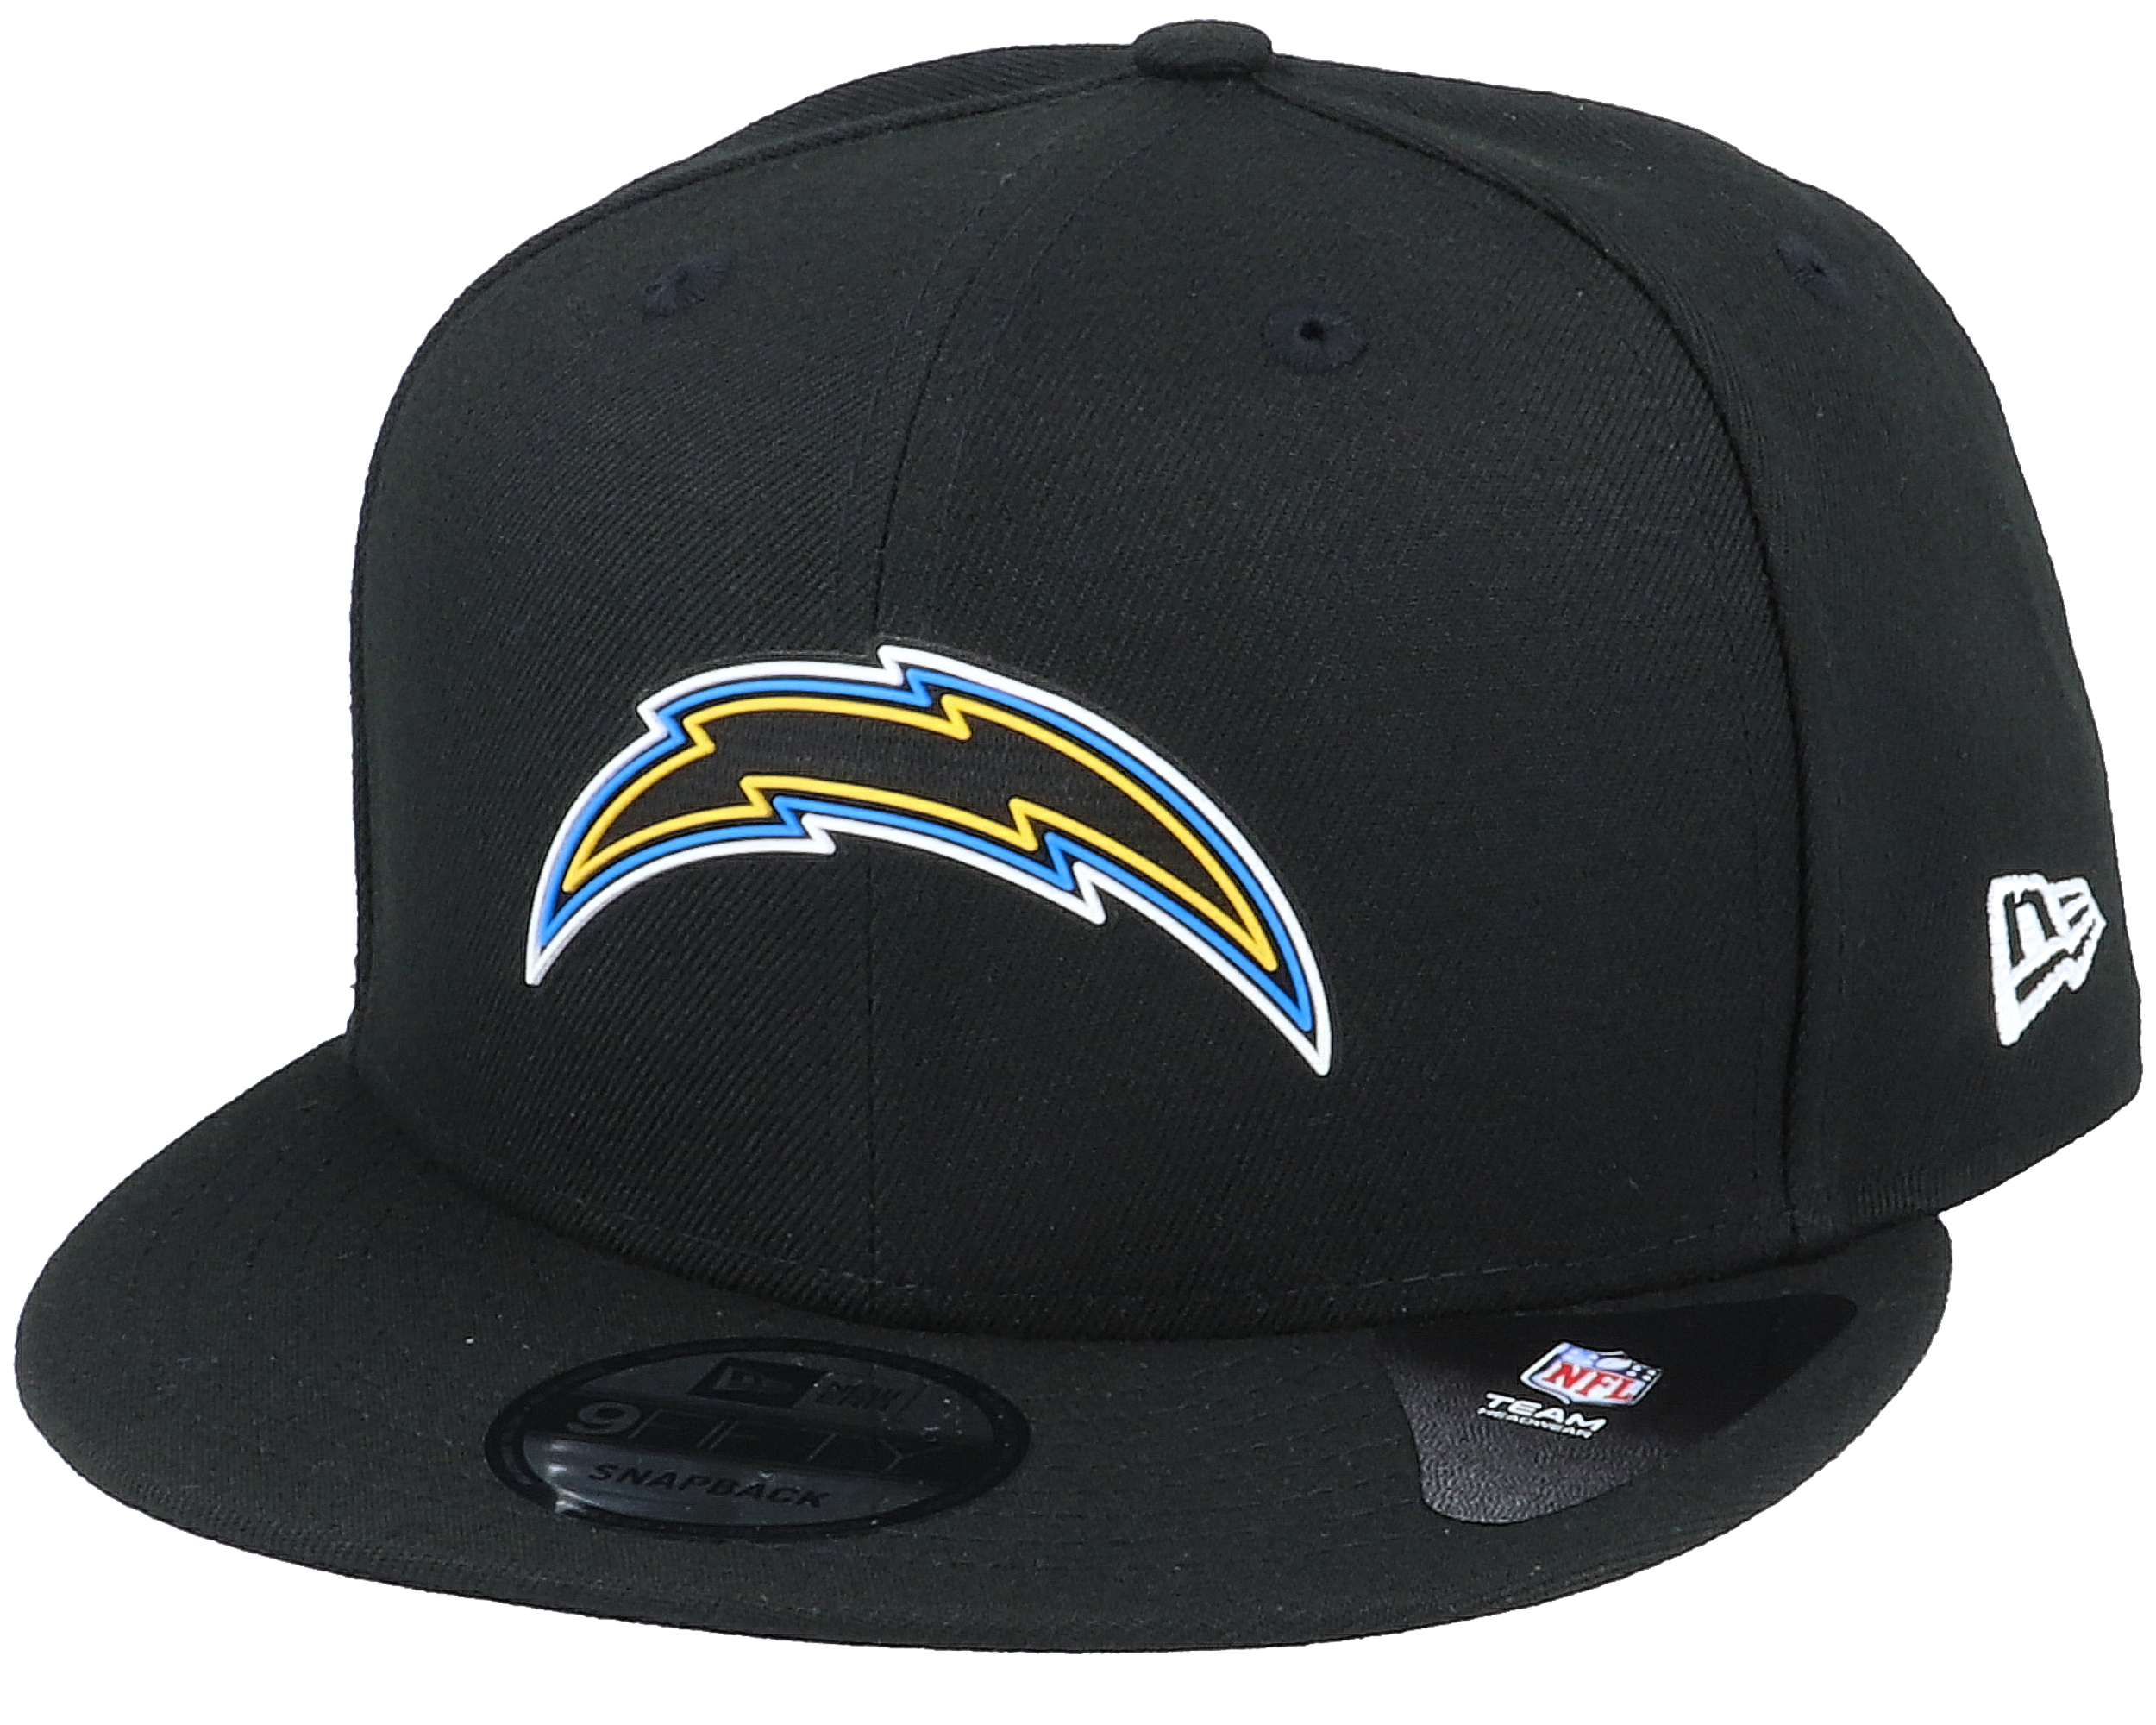 Chargers Draft Hat | ecotidien.fr